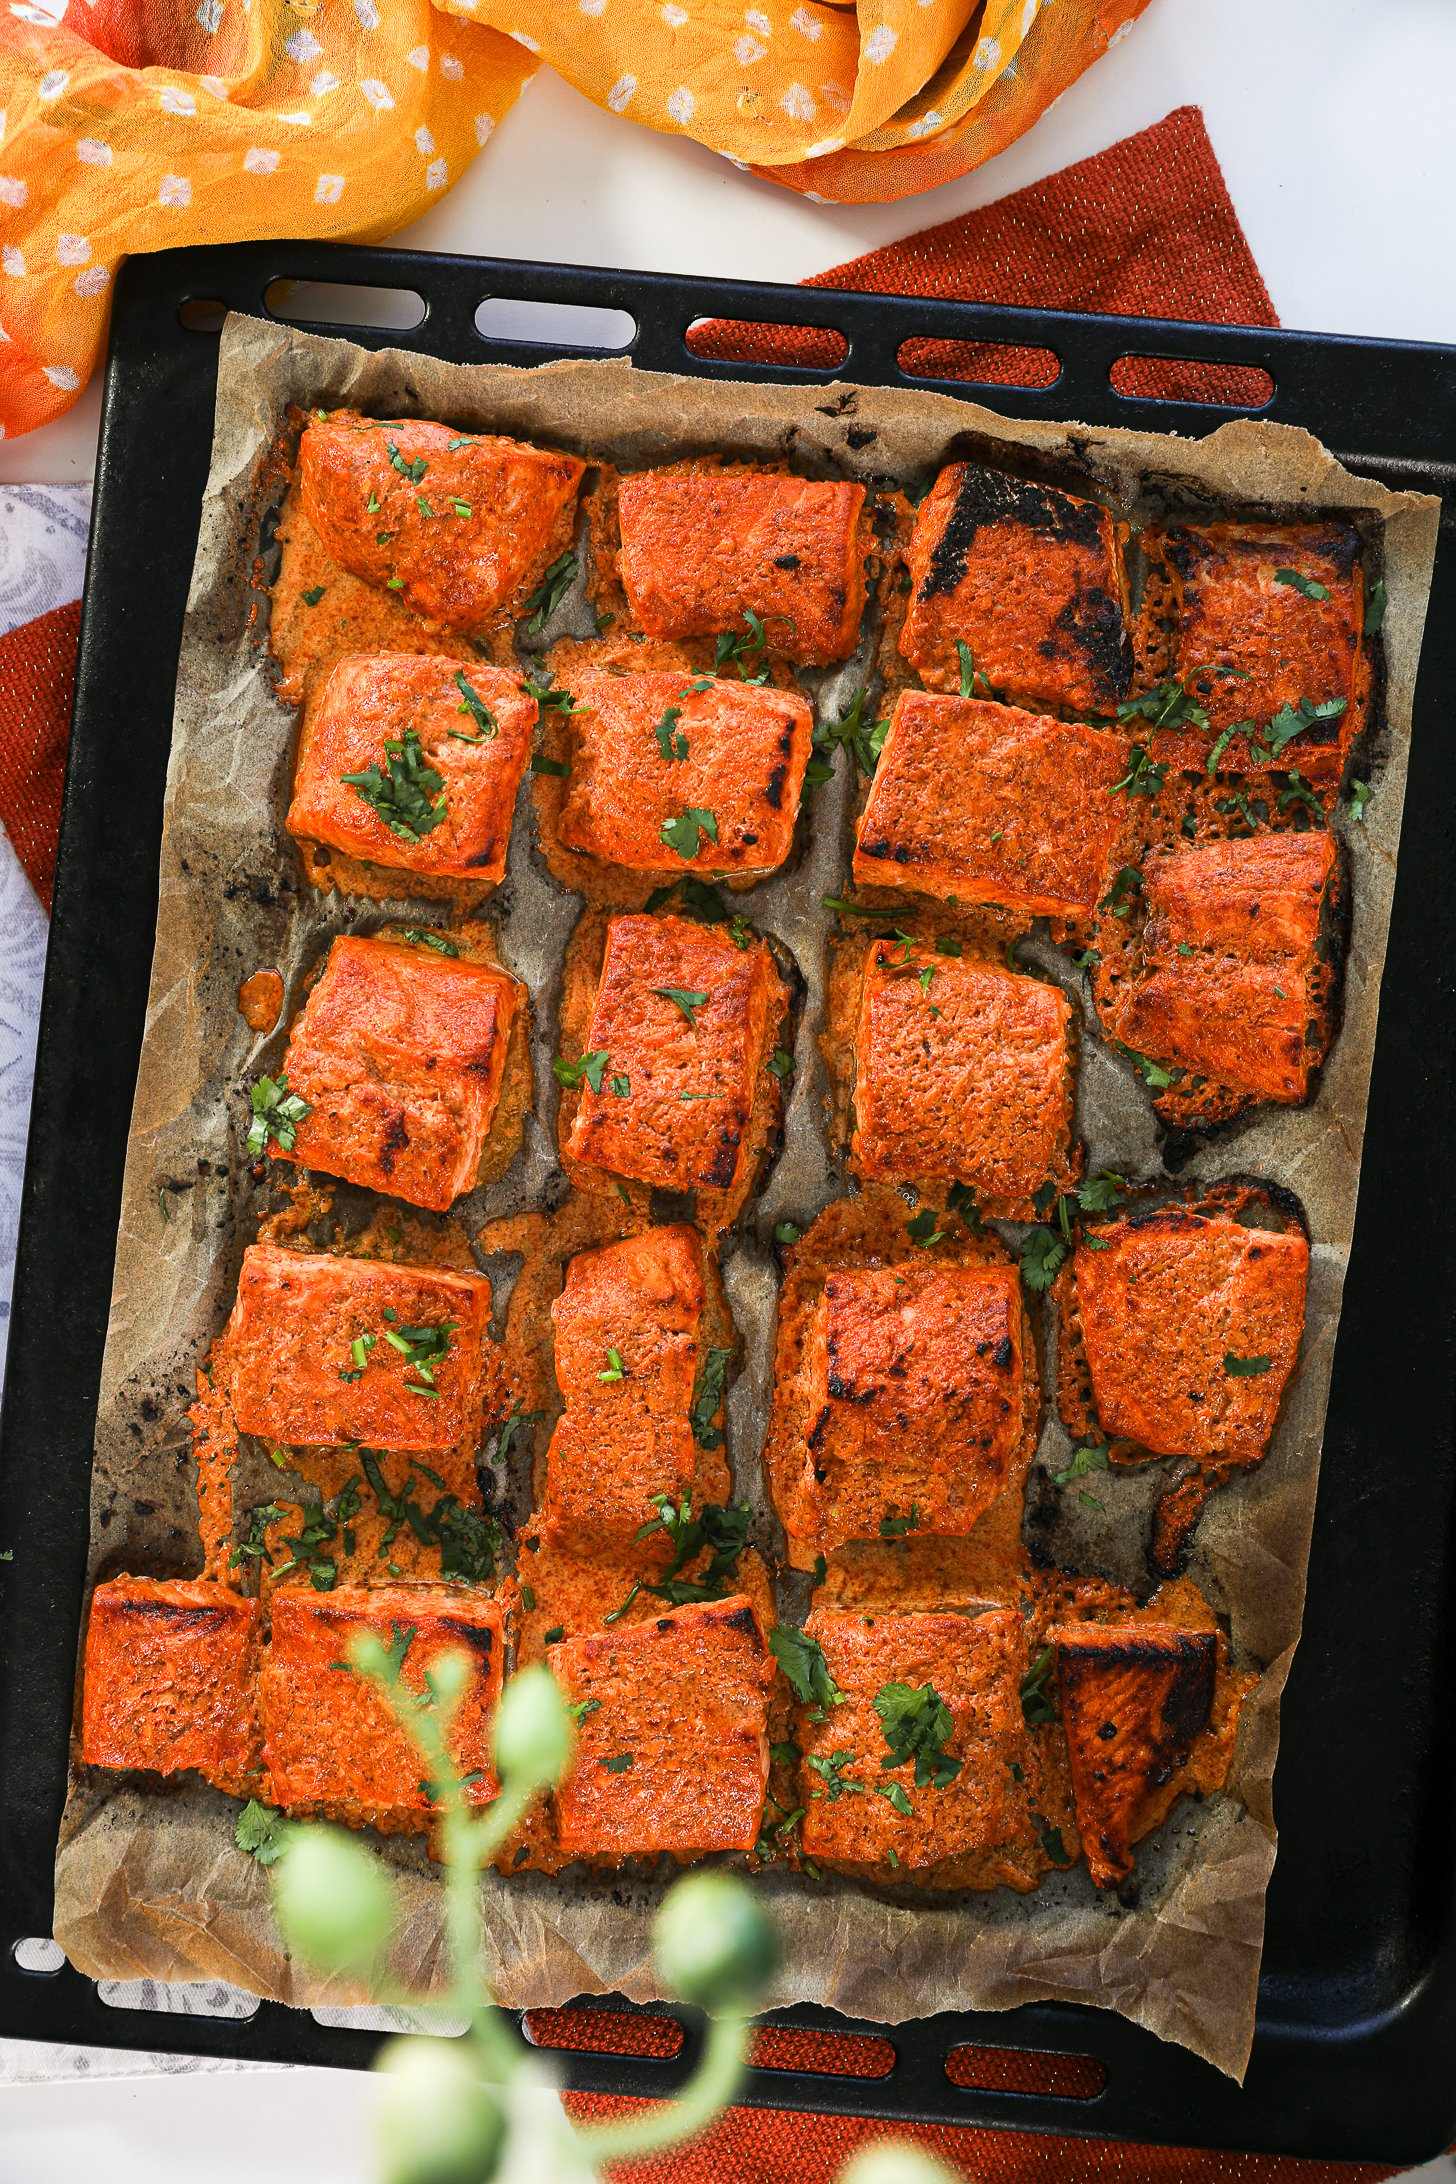 Overhead close up shot of a sheet pan featuring rows of salmon tandoori fish tikka, artfully styled on an orange mat with a traditional scarf.